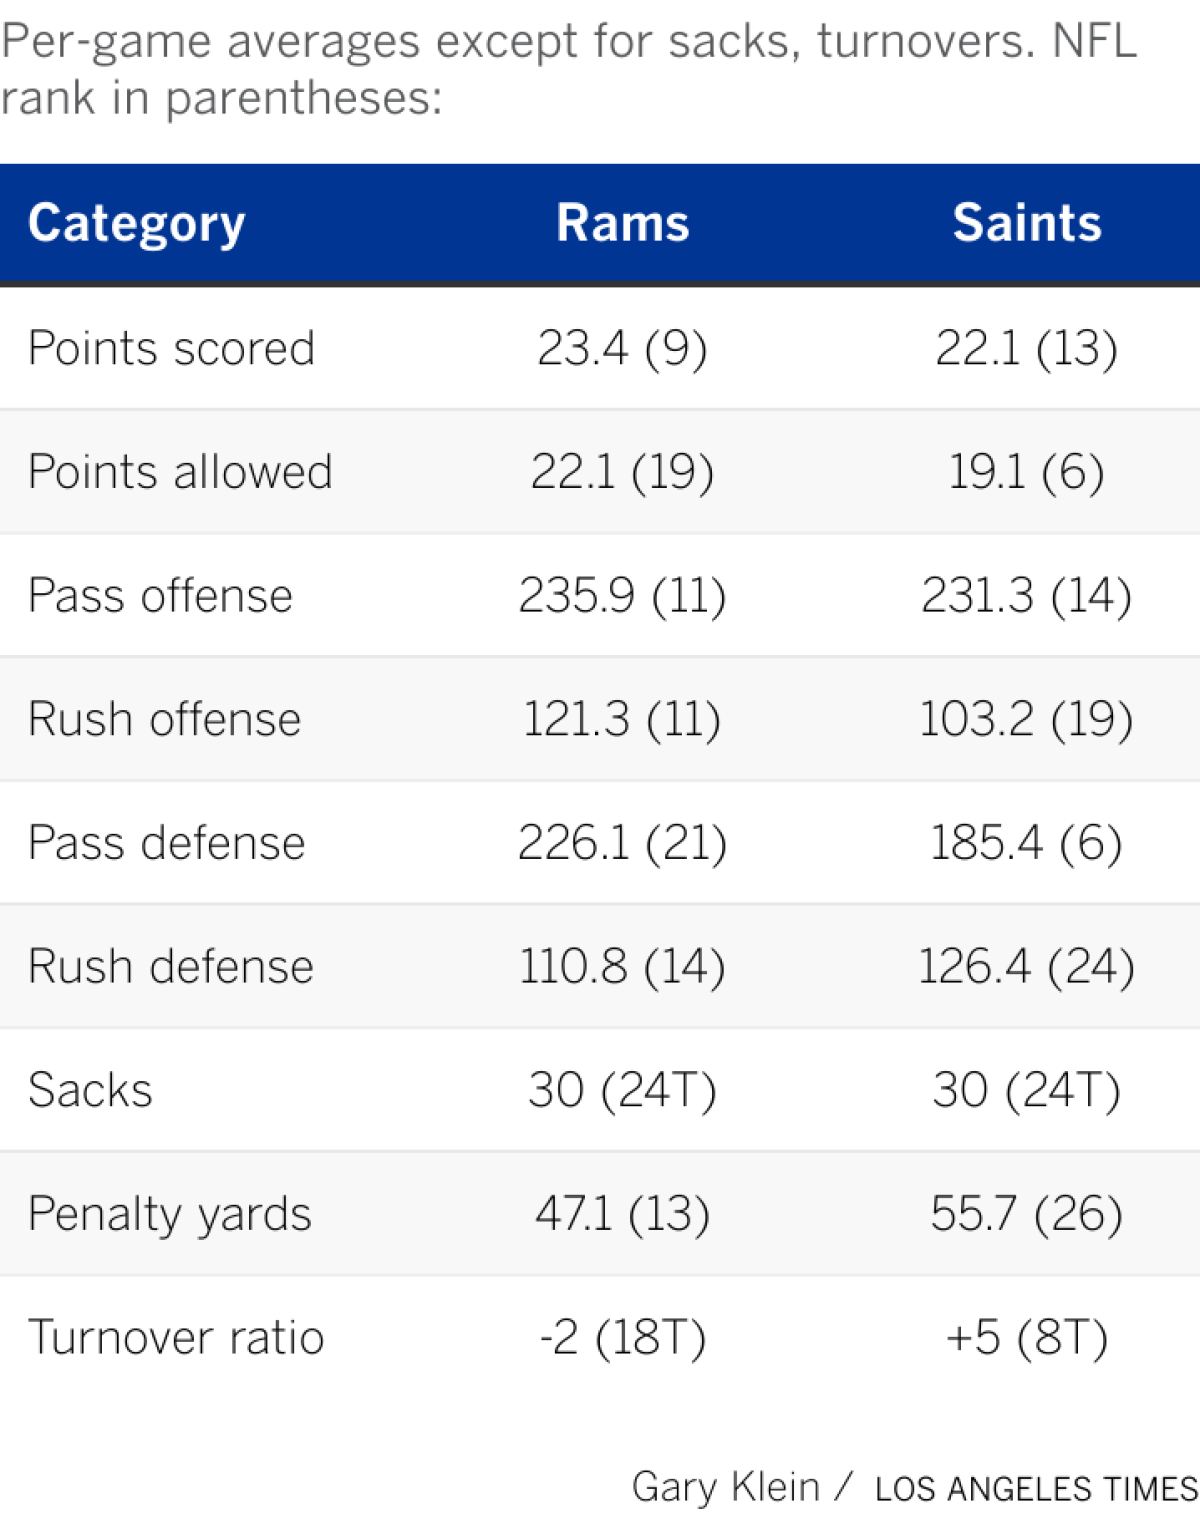 Breaking down the top team statistics for both the Rams and the Saints.